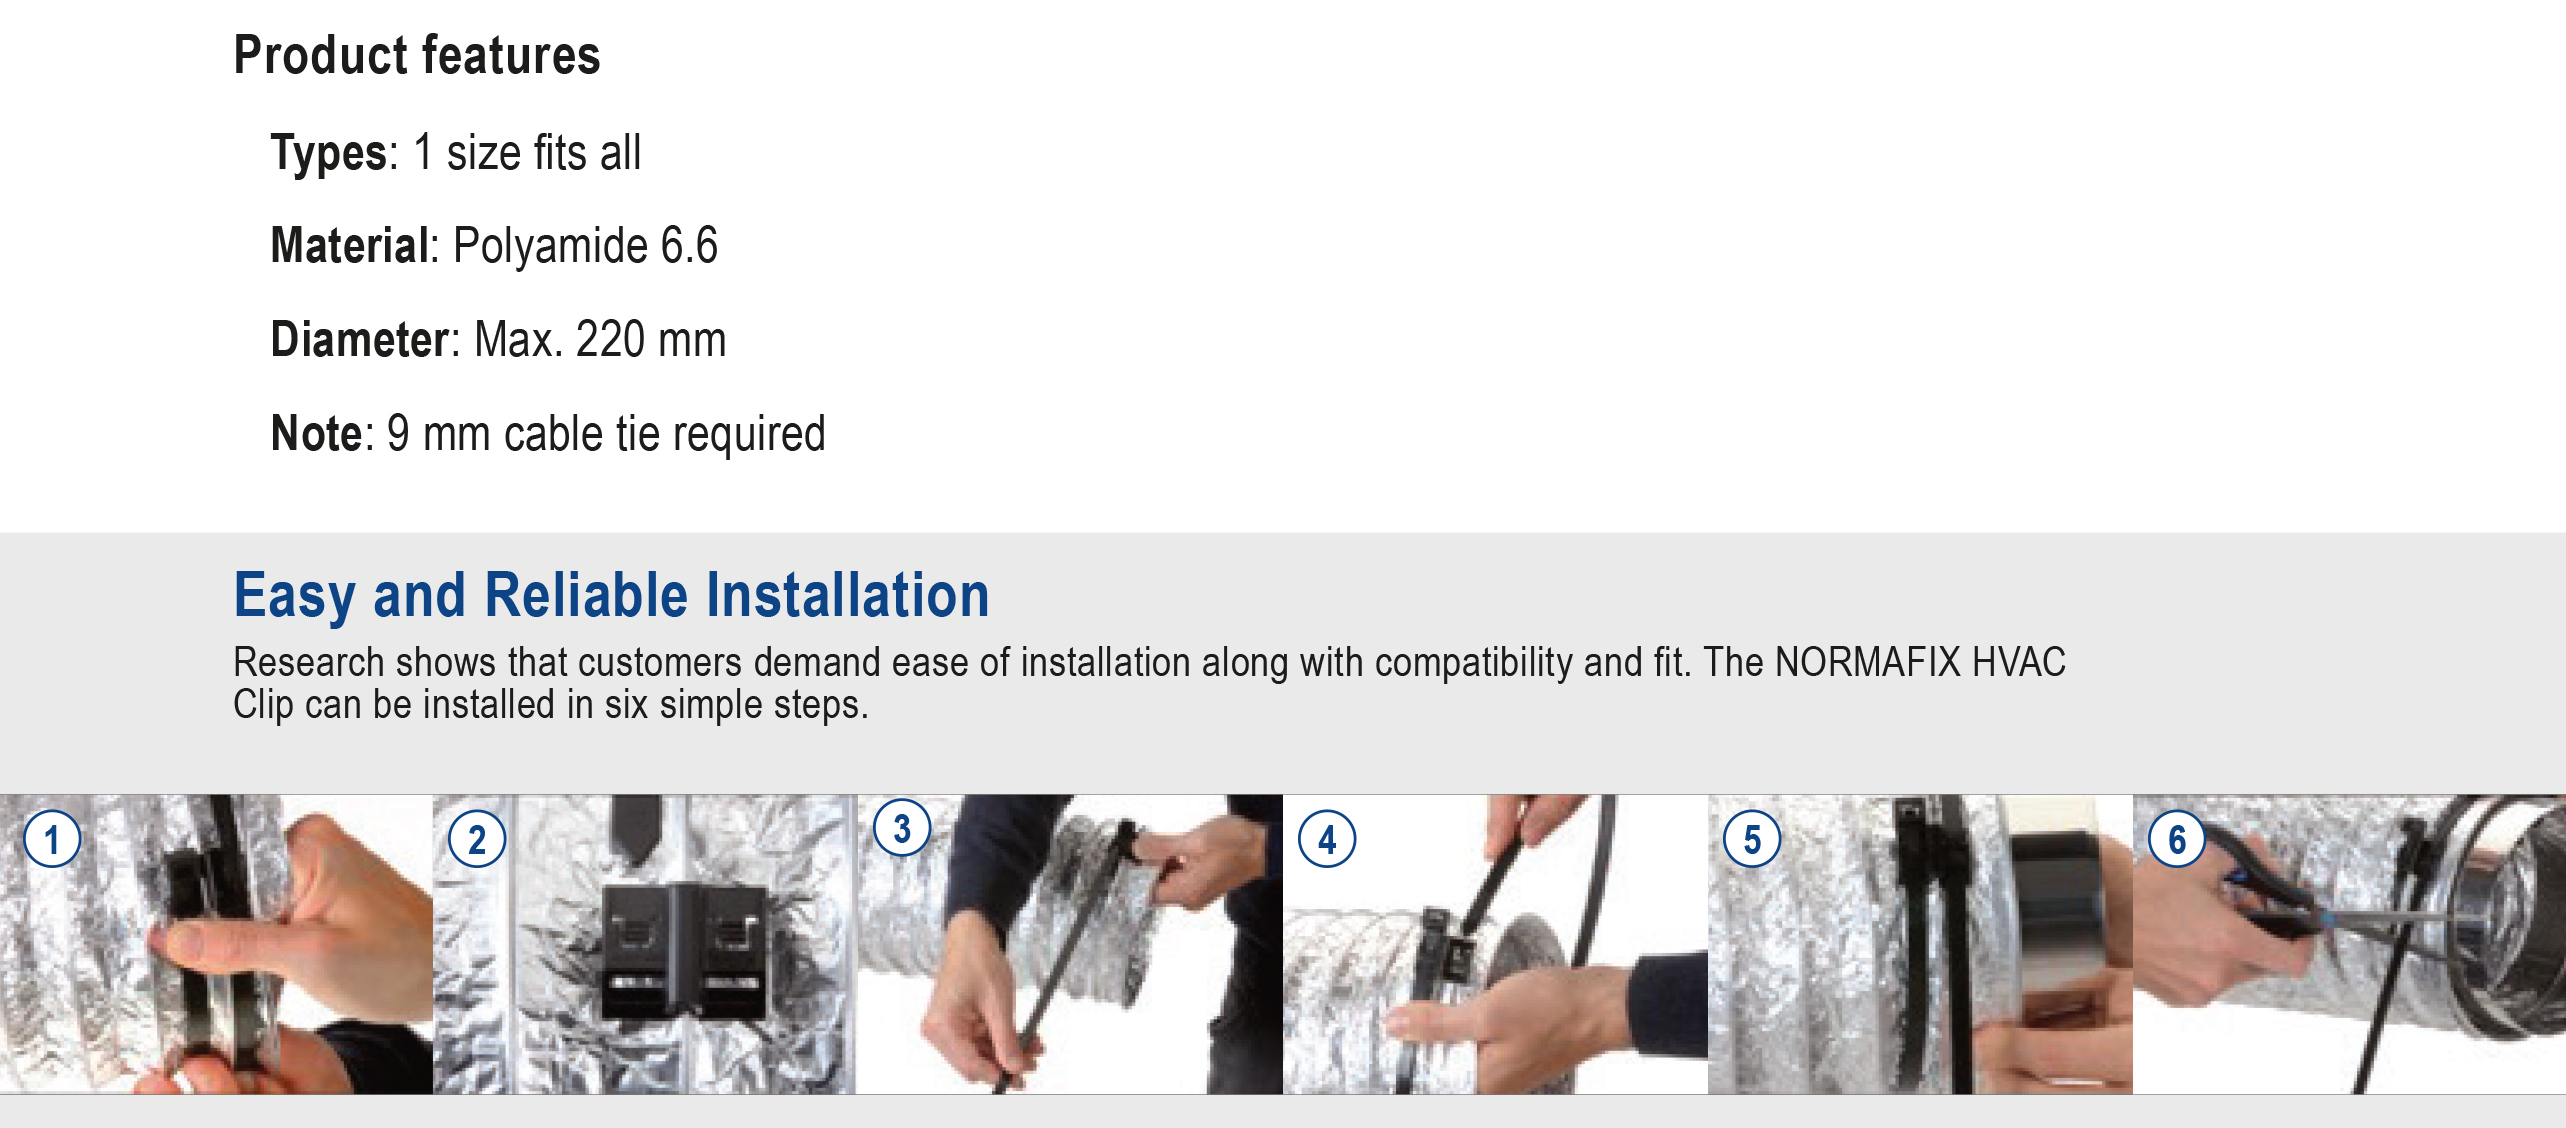 NORMAFIX® HVAC Clip Product Specifications